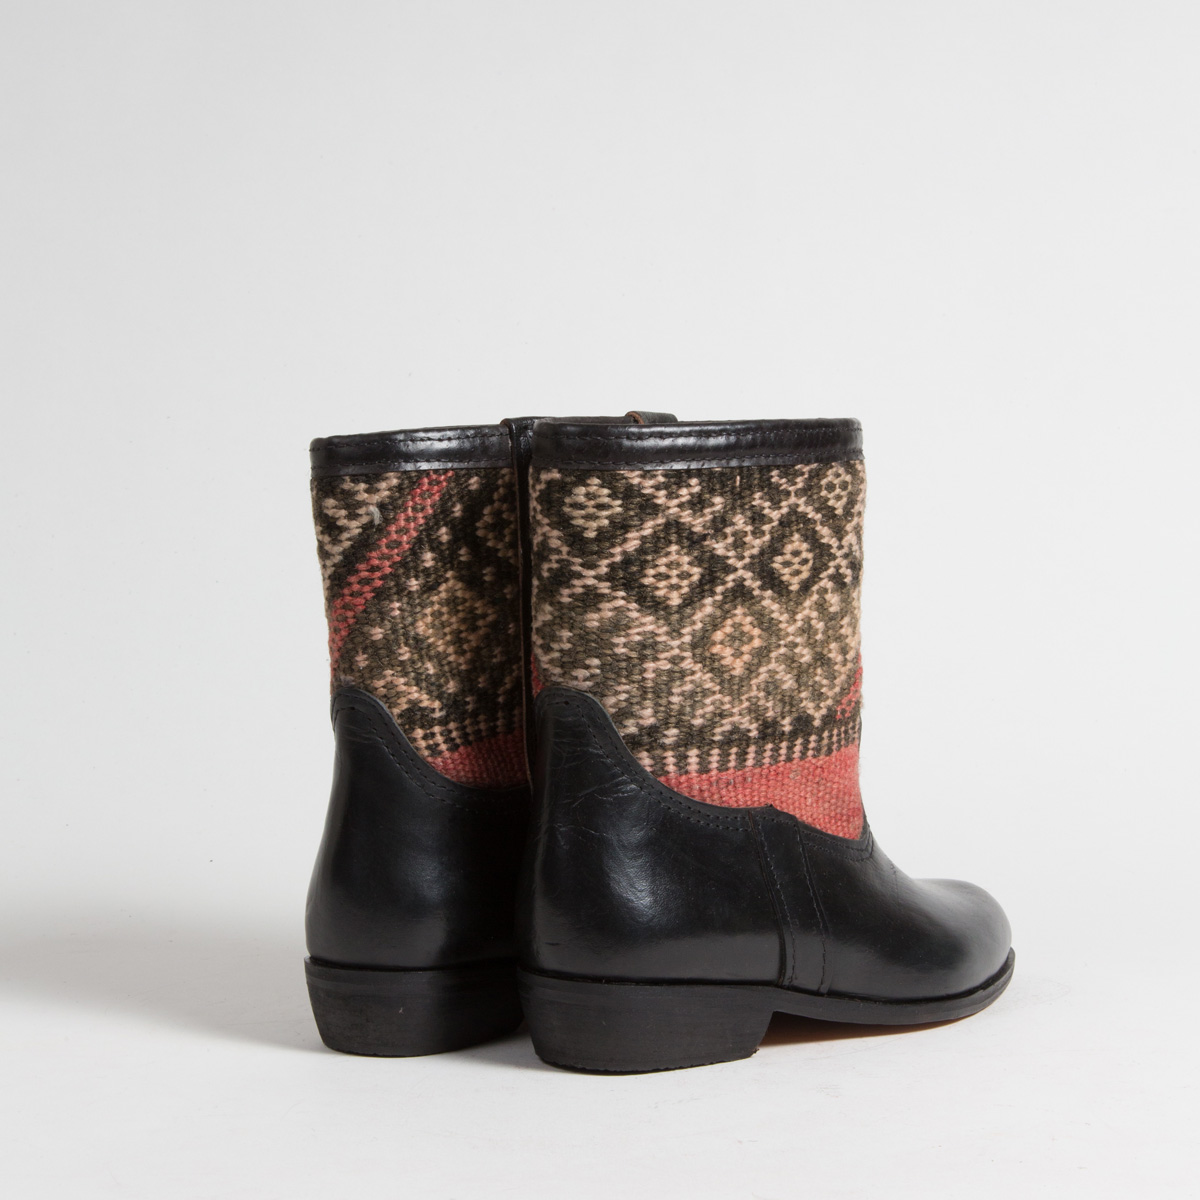 Bottines Kilim cuir mababouche artisanales (Réf. RPN10-38)